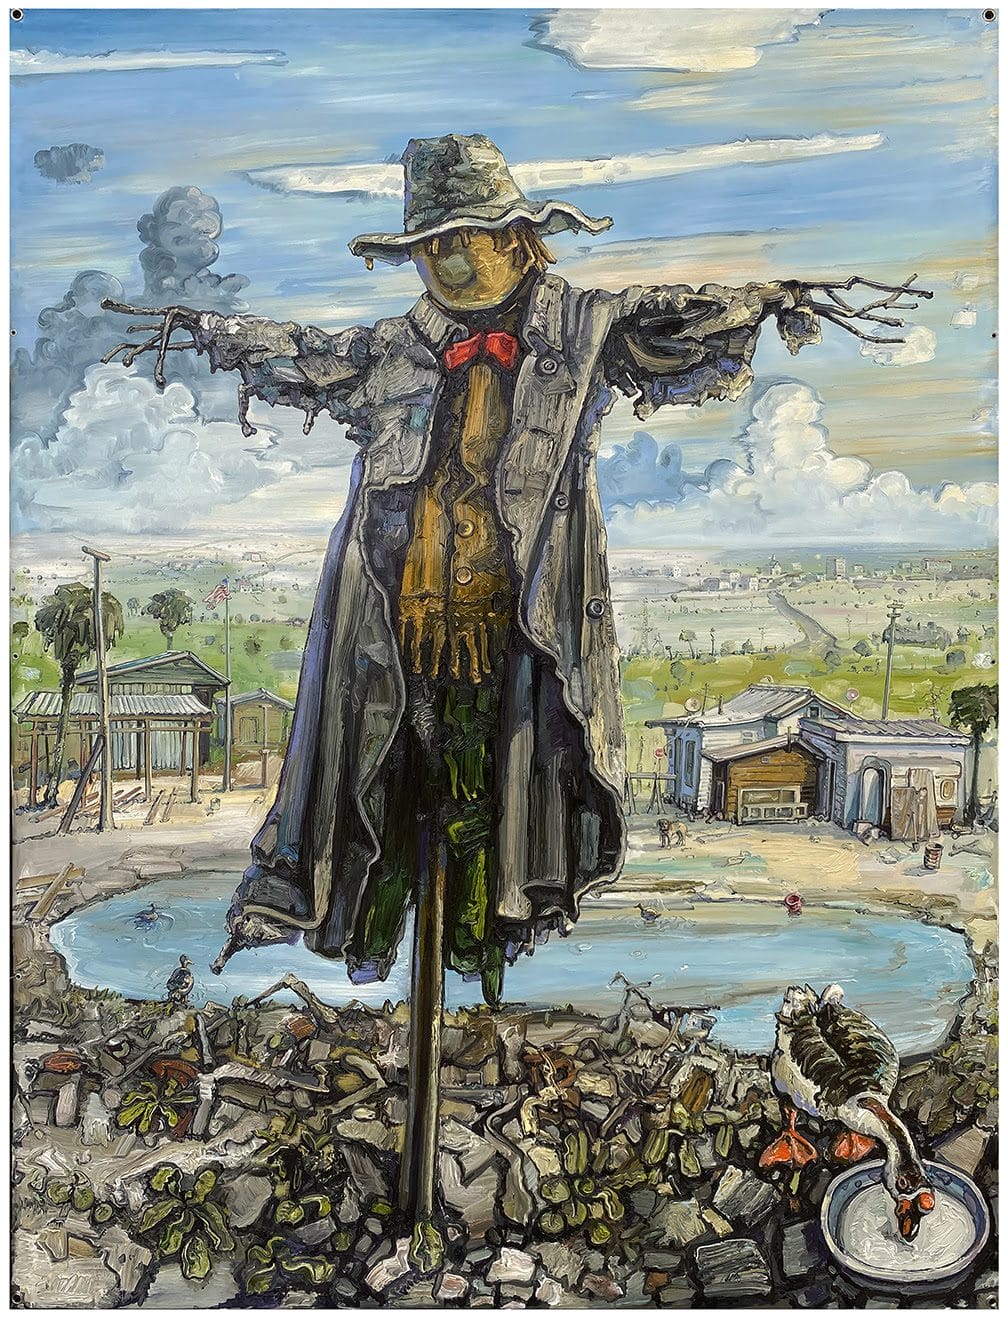 Amer Kobaslija, Scarecrow with Ducks, 2021. Oil on unstretched canvas with grommets, 81 x 61 inches.